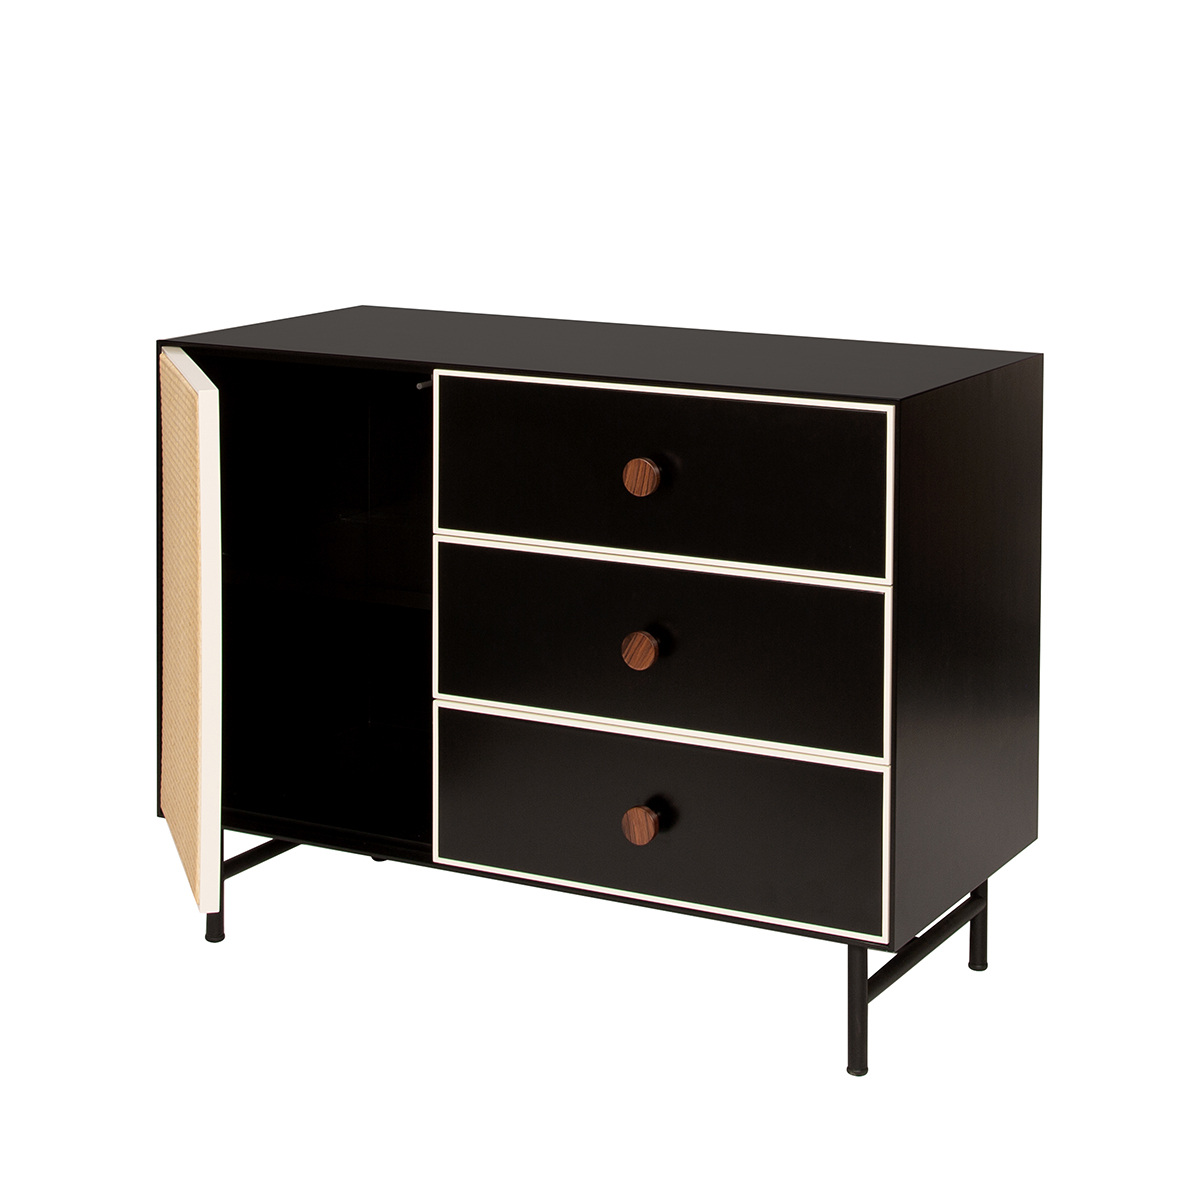 Chest of Drawers Essence, Black / Ivory - L100 x W45 x H75 cm - Lacquered wood - image 2